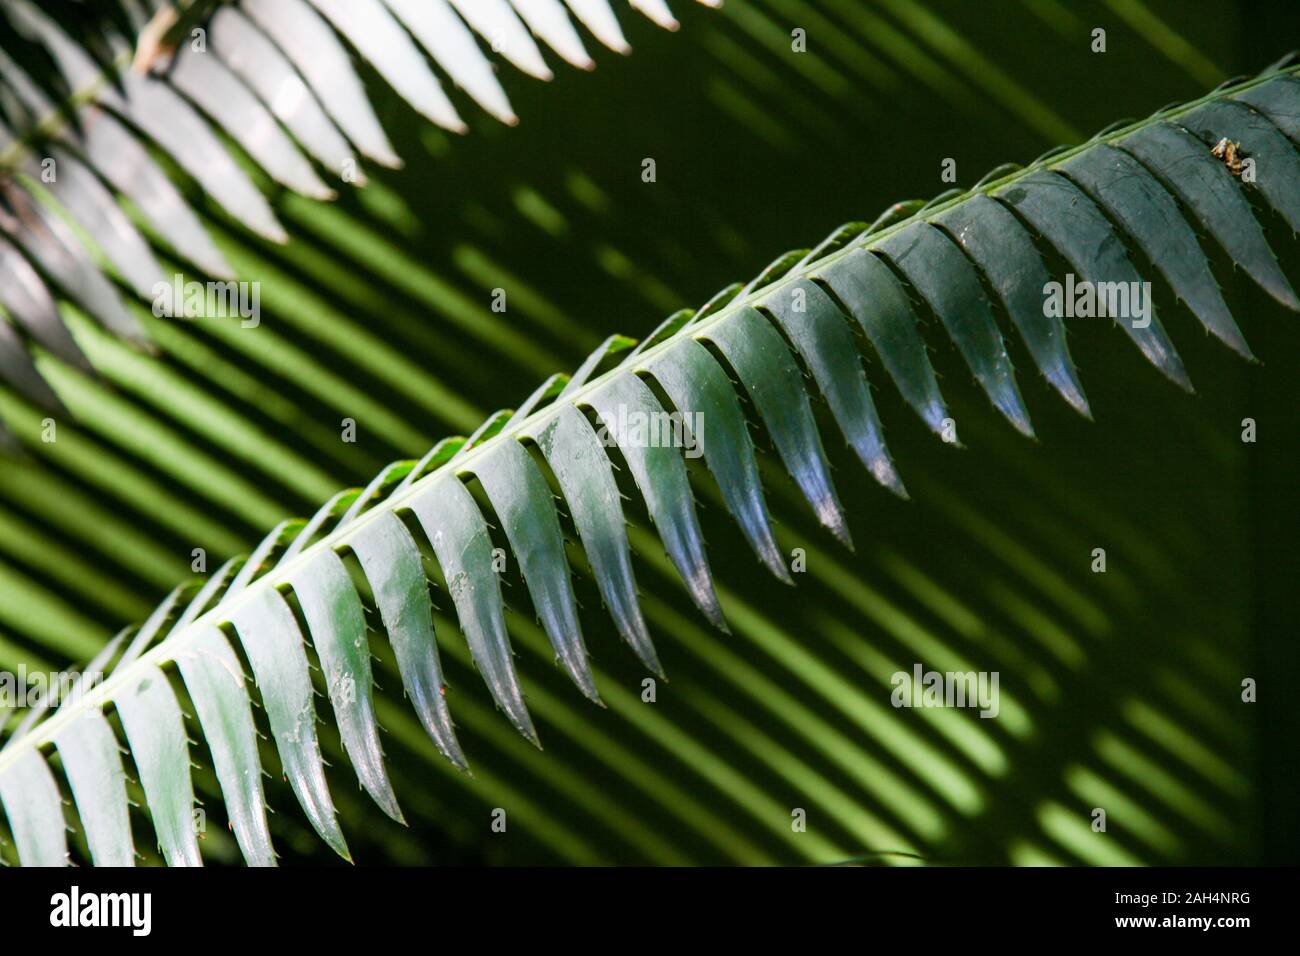 An abstract of green, lush leaves Stock Photo